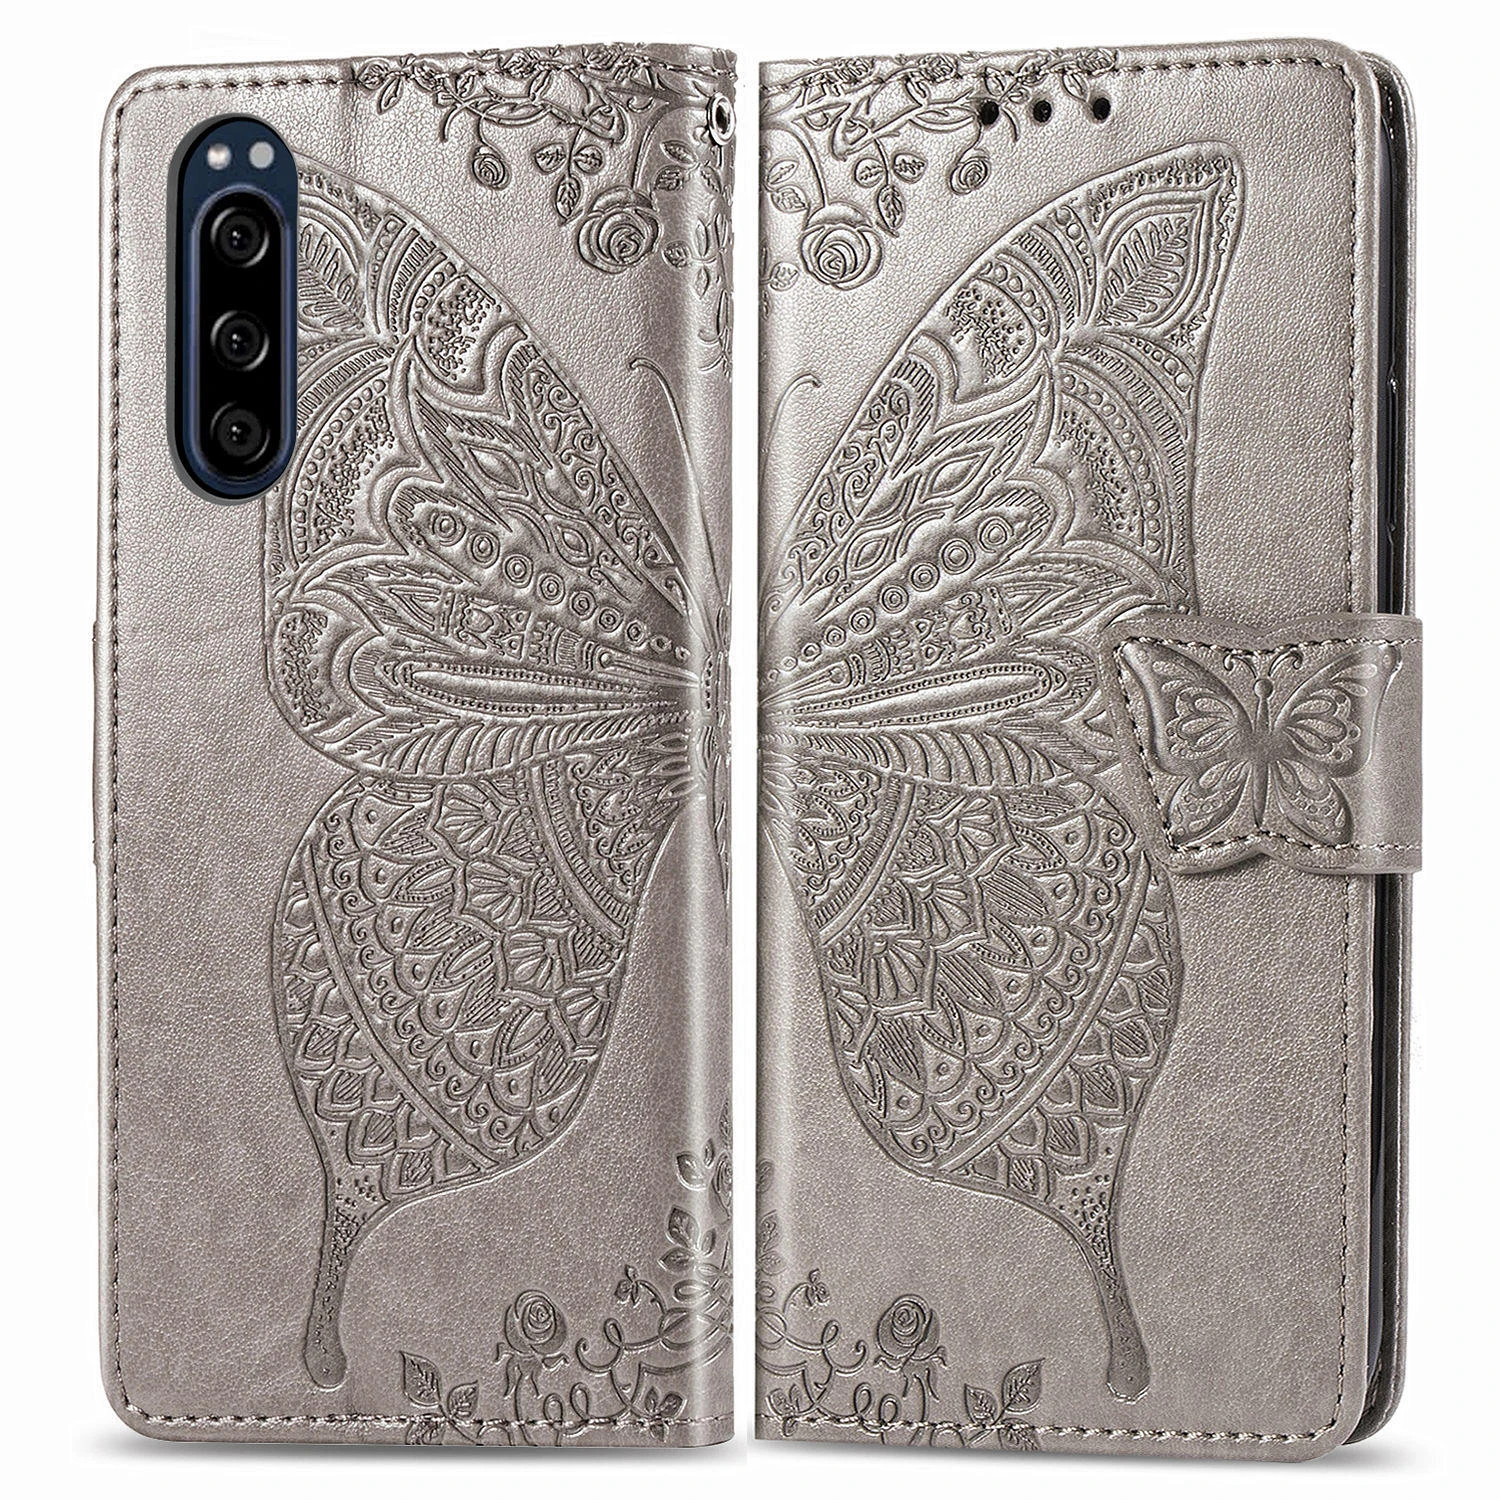 Cute Butterfly Case for Sony Xperia 5 (6.1in) Cover Flip Leather Wallet  Book Black SOV41 SO-01M 901SO SO01M Cases for Xperia5